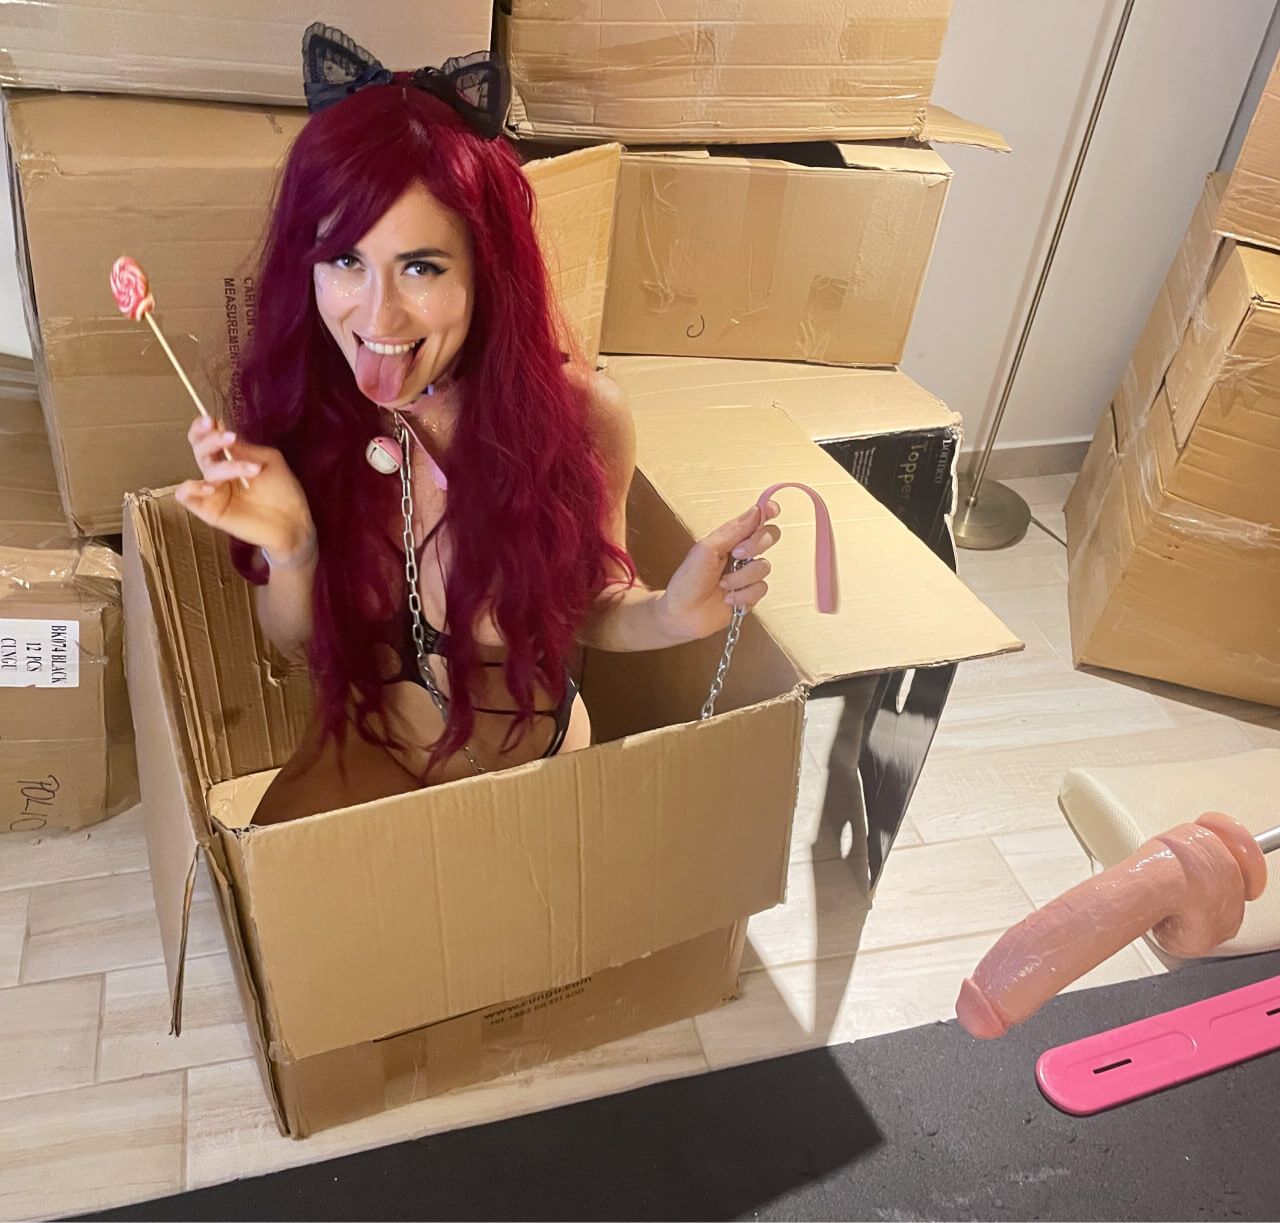 Fetish sex out of the box #6